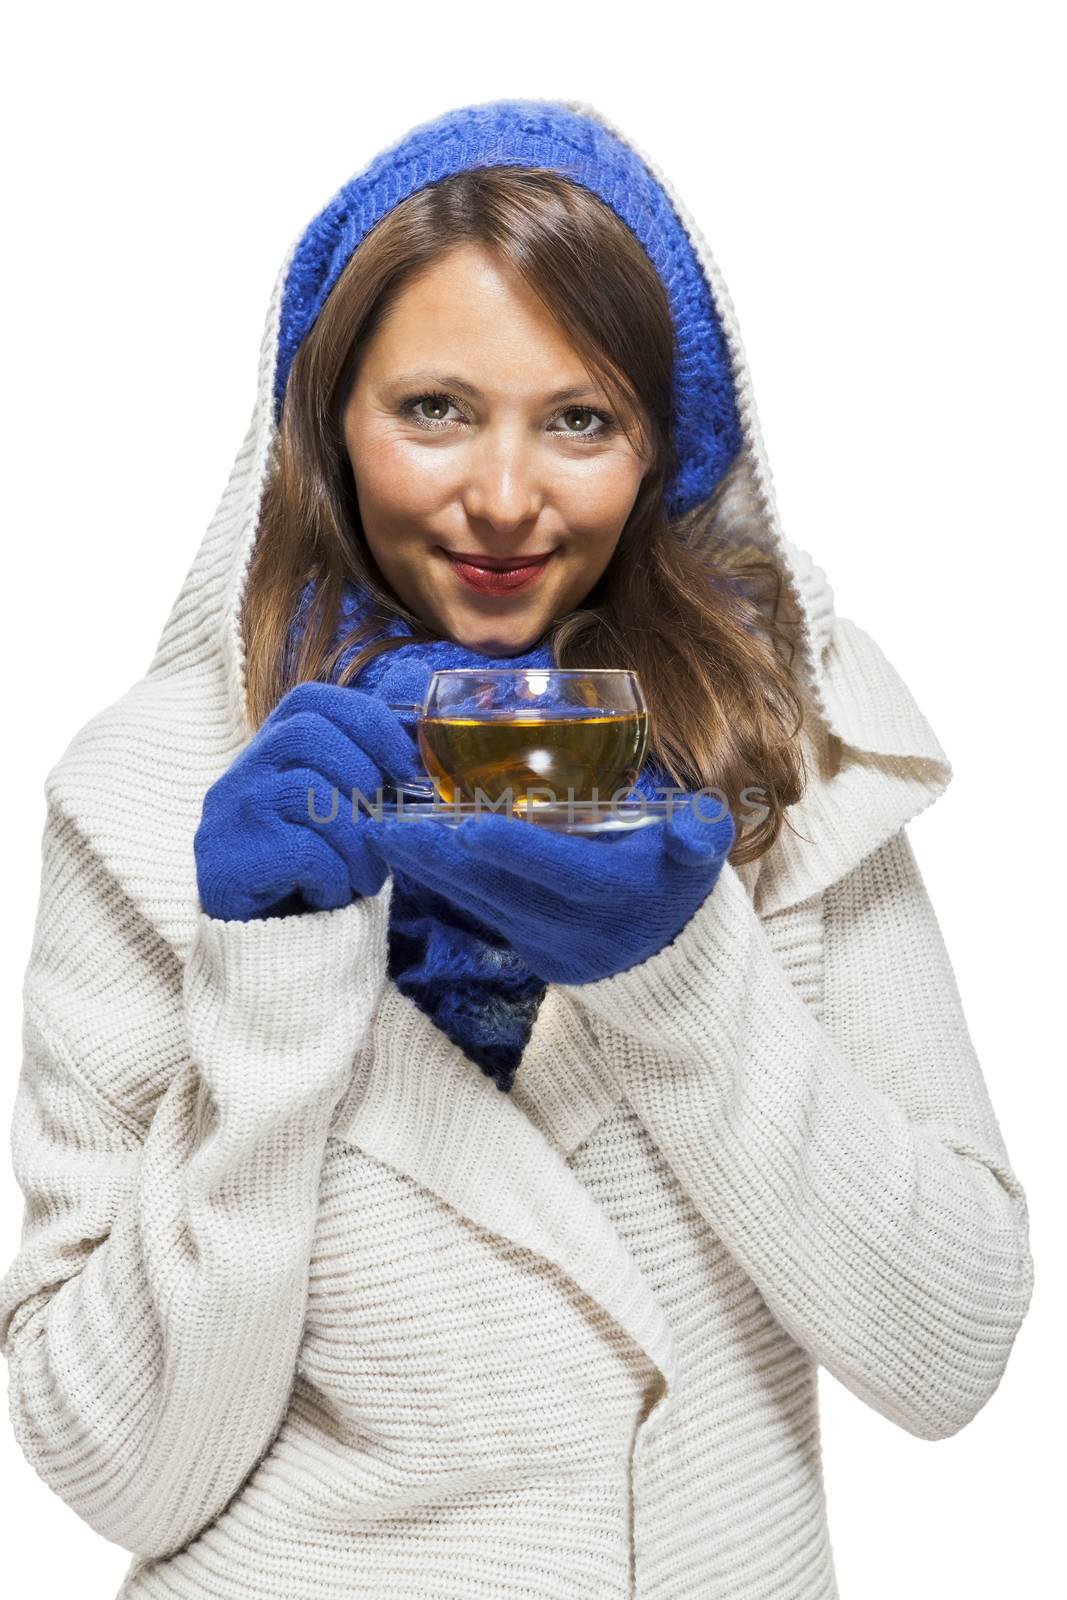 Fashionable young woman sipping hot tea by juniart